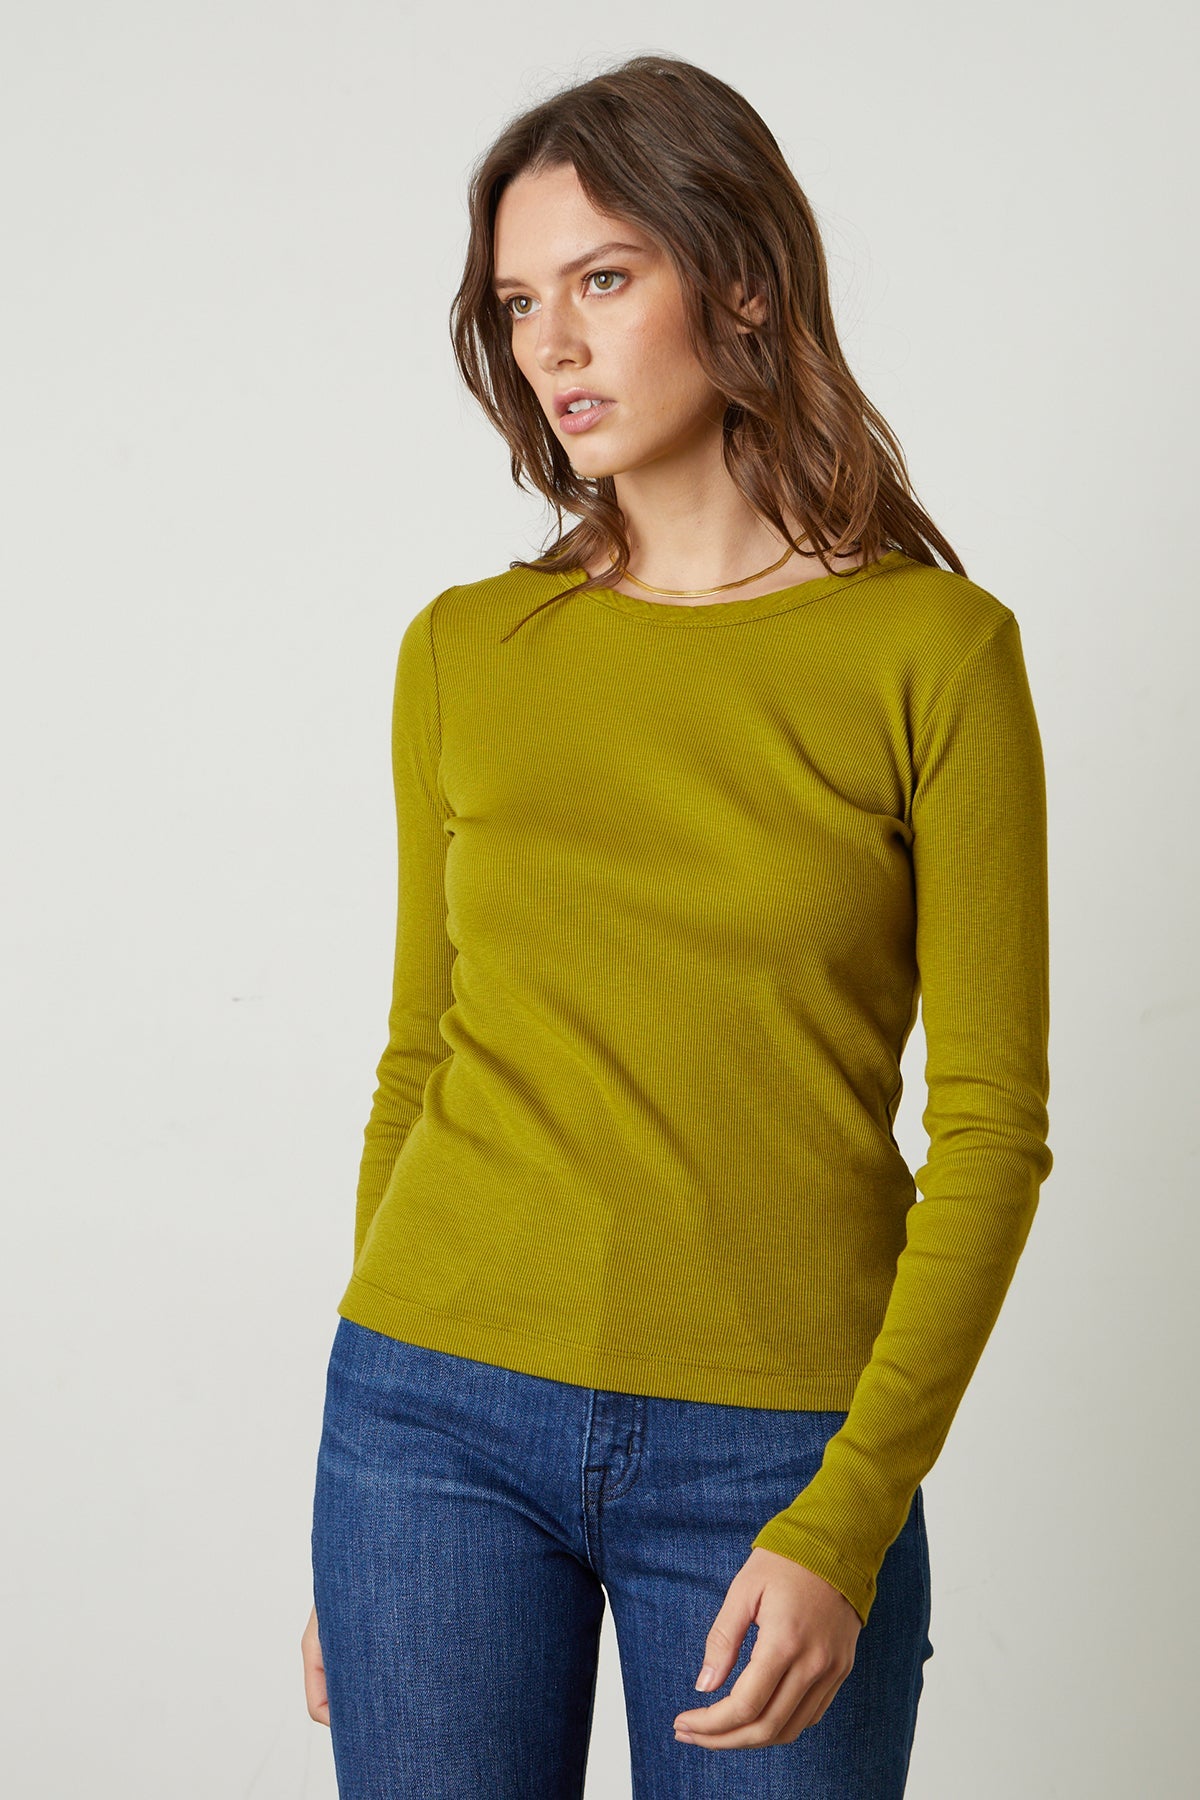 A woman wearing a green Velvet by Graham & Spencer BAYLER RIBBED SCOOP NECK TEE sweater and jeans.-26629804622017